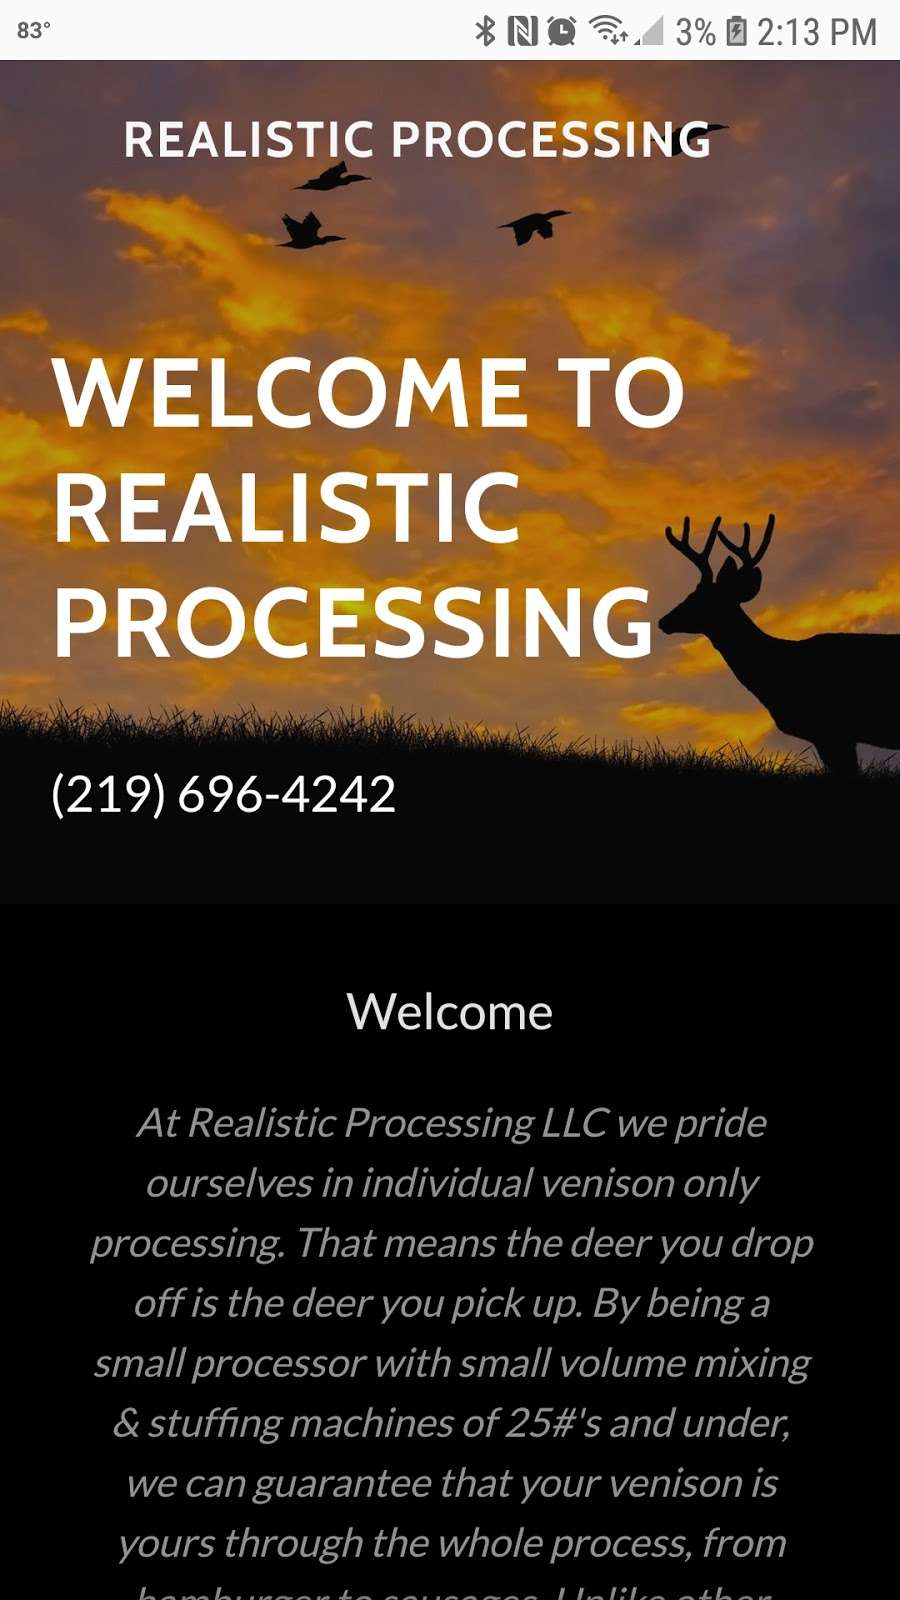 Realistic processing | 15820 Chestnut St A, Lowell, IN 46356 | Phone: (219) 696-4242